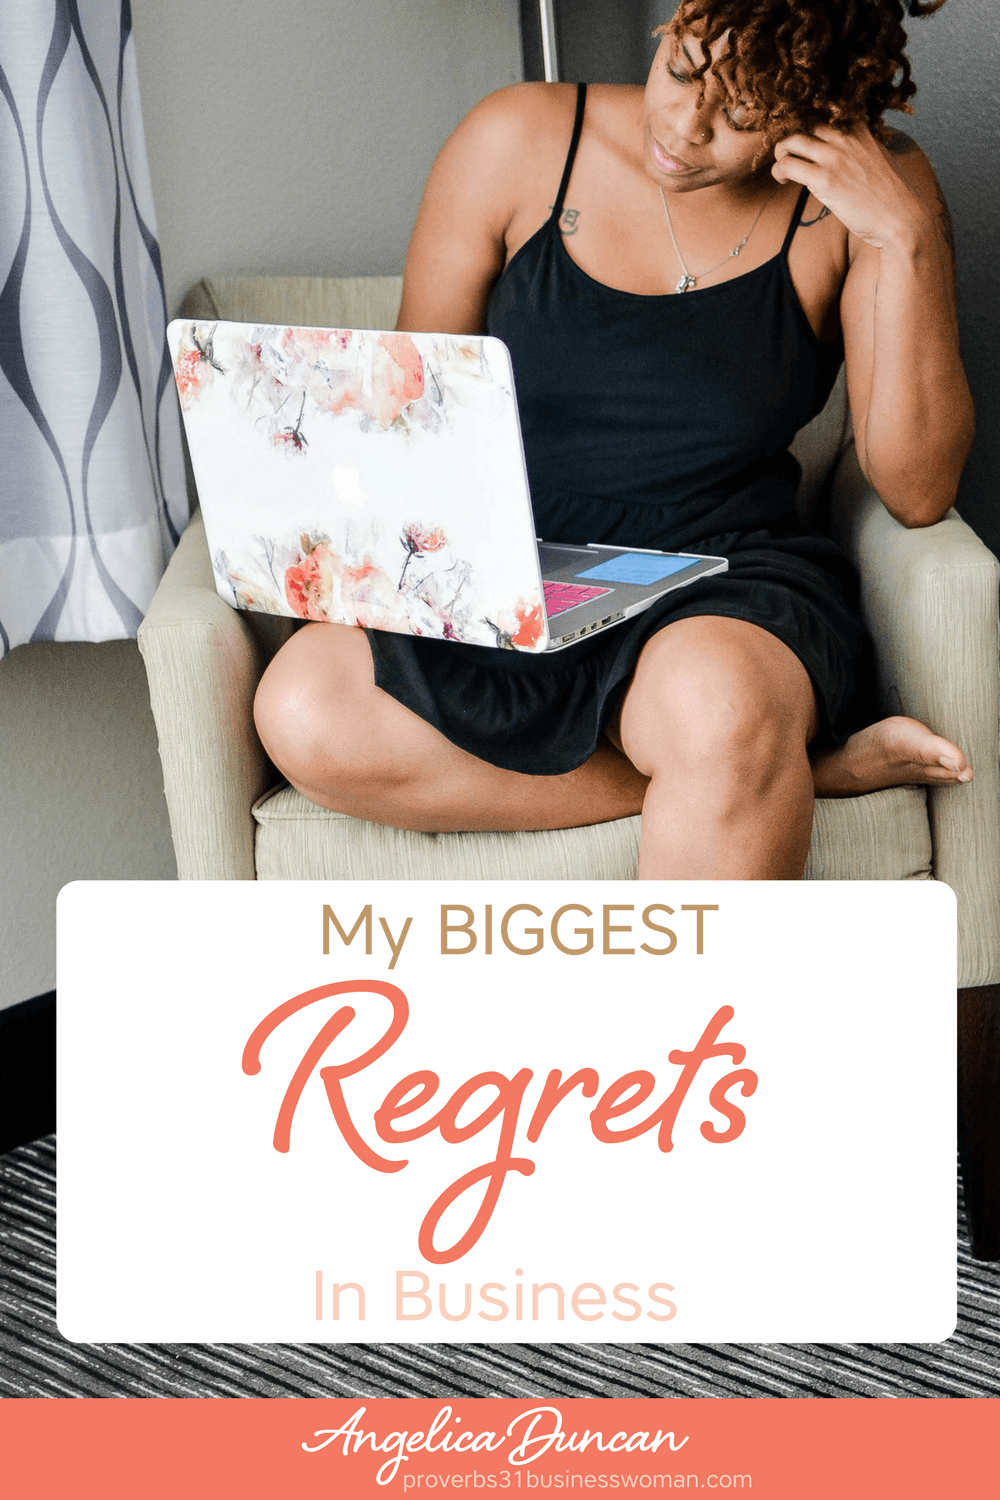 My biggest regrets in business have nothing to do with clients, money, or marketing...but it sure does affect all of that. It's not what you think either! #businessregrets #businessmistakes #mompreneur #onlinebusiness #wahm #womeninbusiness #christianbusiness #christianwomeninbusiness #christianentrepreneurs #proverbs31 #proverbs31woman #proverbs31businesswoman #proverbs31enrepreneur #p31 #angelicaduncan #silkoversteel #sos